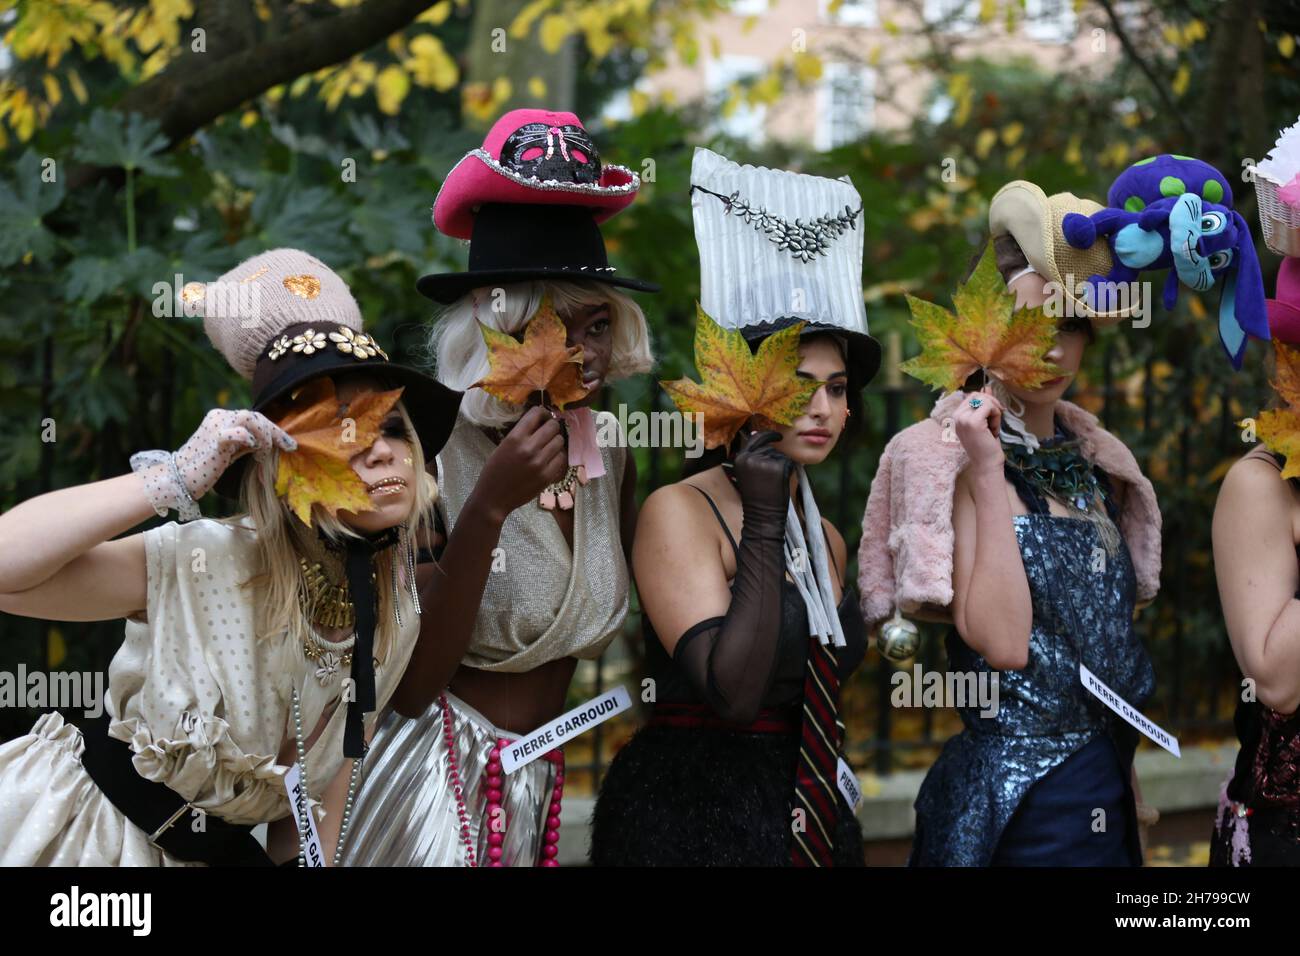 Models showcase Pierre Garroudi's collection during the designer's flash mob fashion show in London, UK Stock Photo